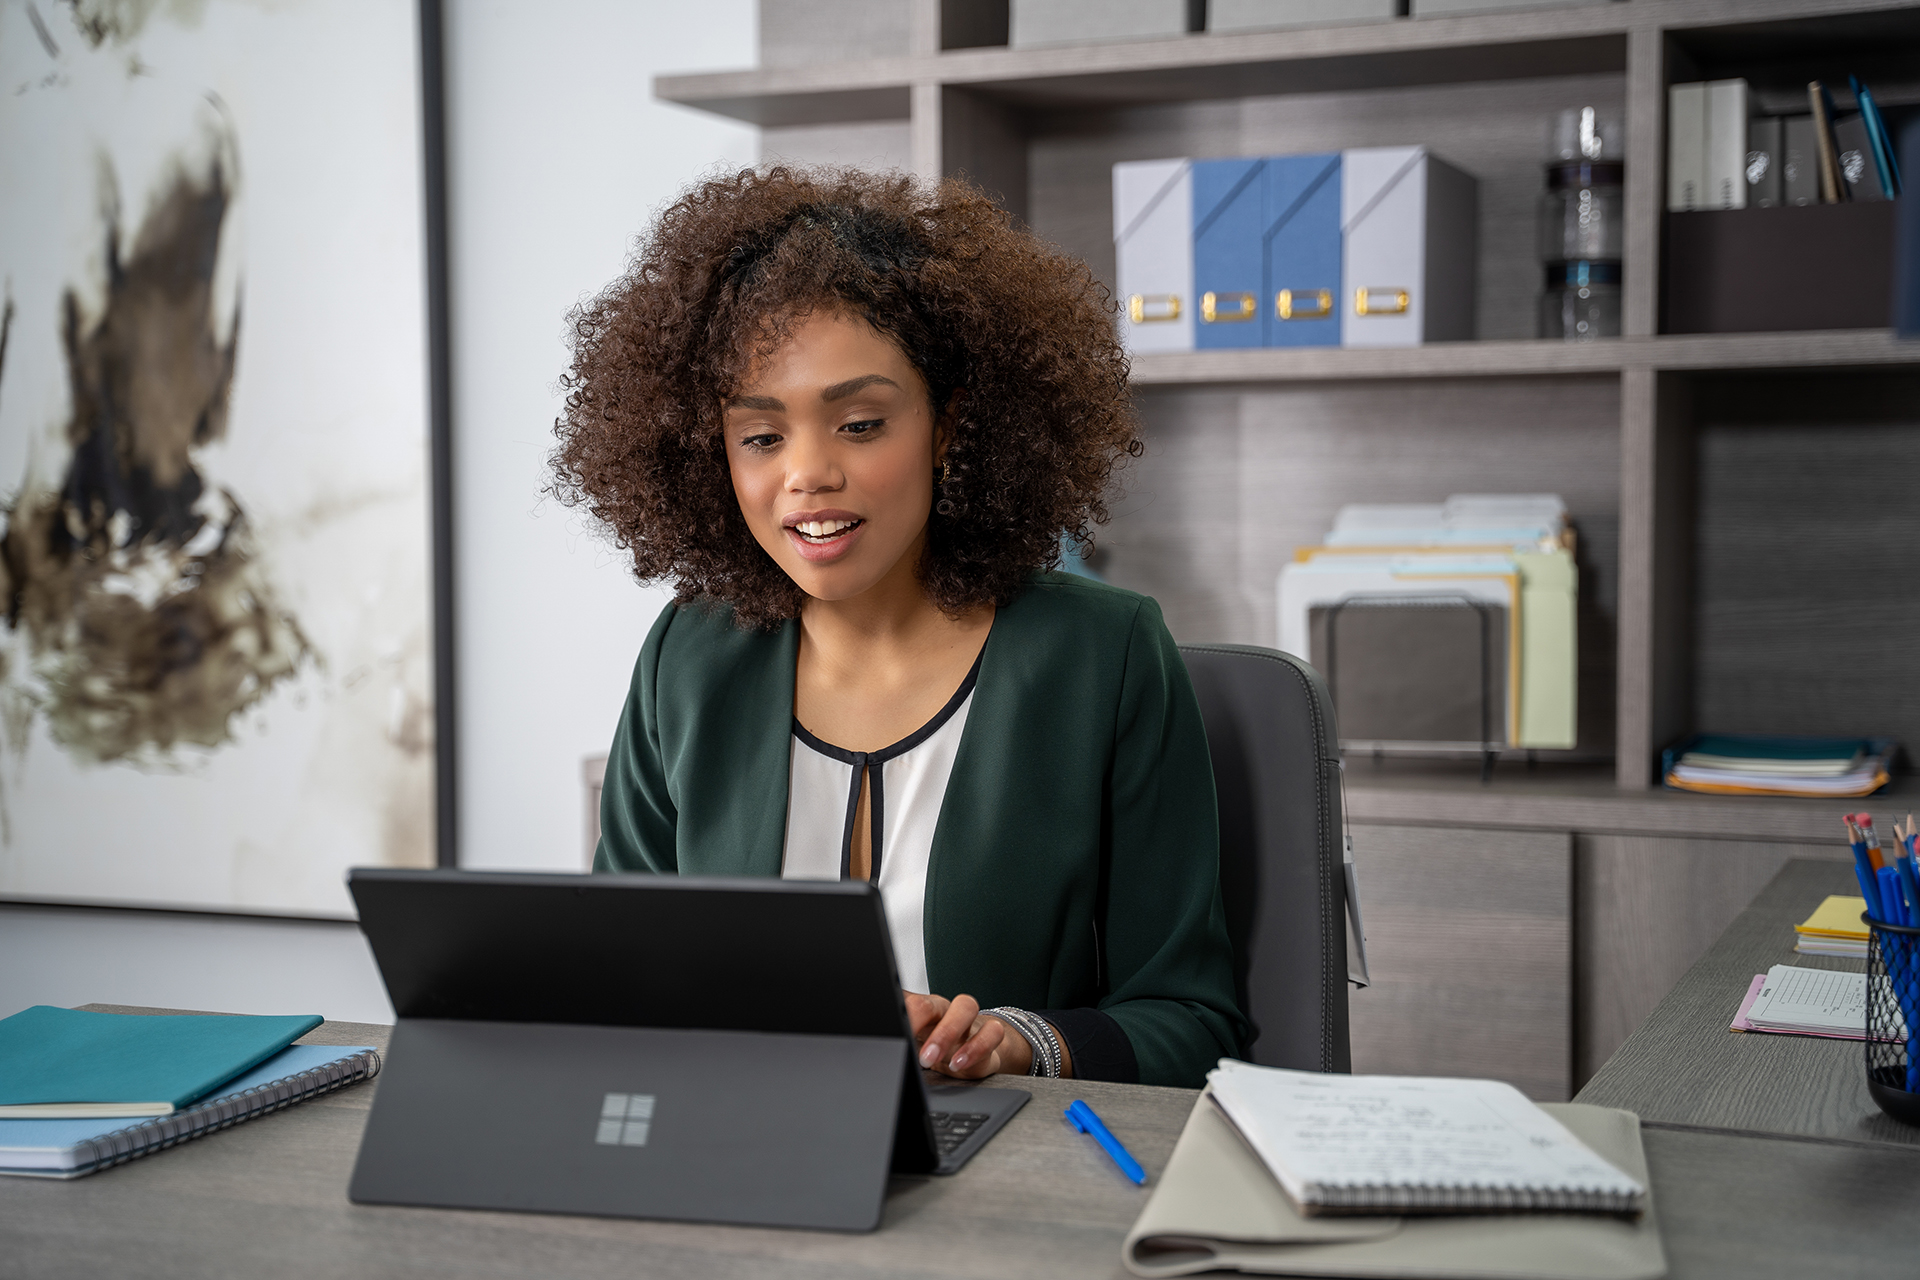 Introducing Microsoft Dynamics 365 Copilot, the world's first copilot in both CRM and ERP, that brings next-generation AI to every line of business - The Official Microsoft Blog